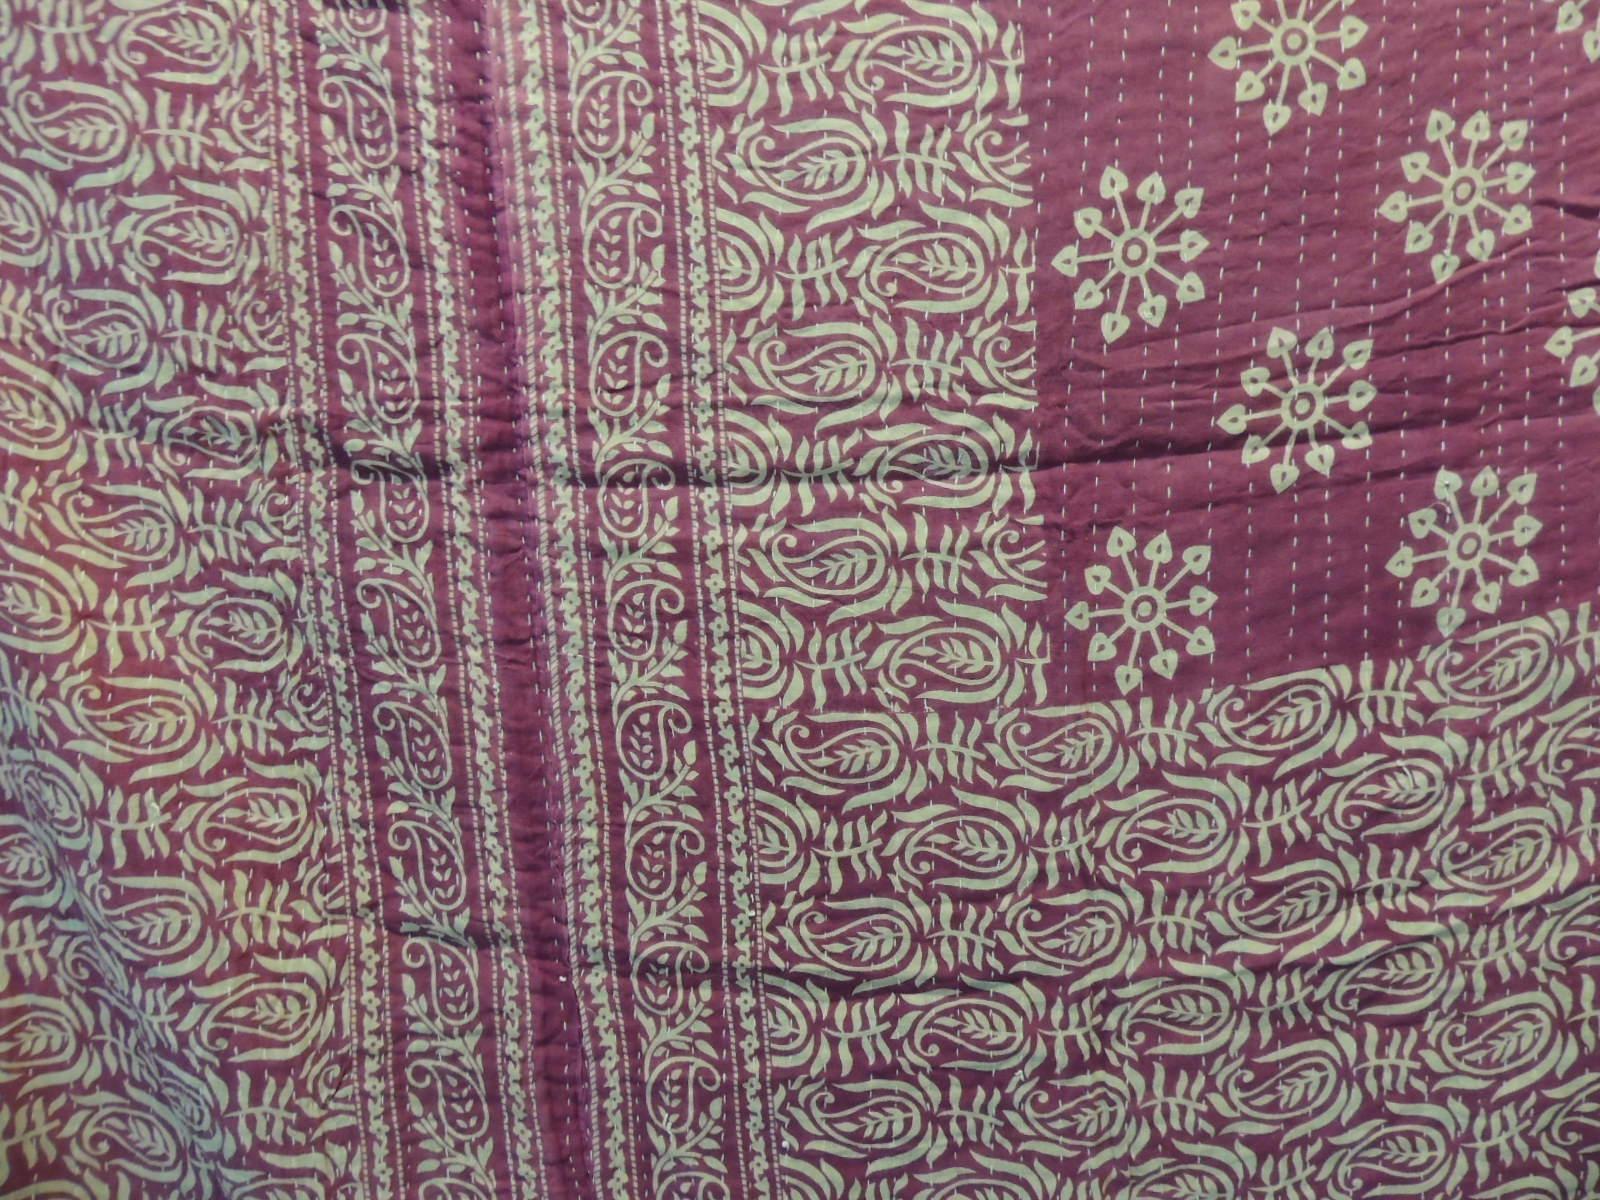 Late 20th Century Indian Kantha Colorful Quilted Throw with Triangles, Circles and Flowers